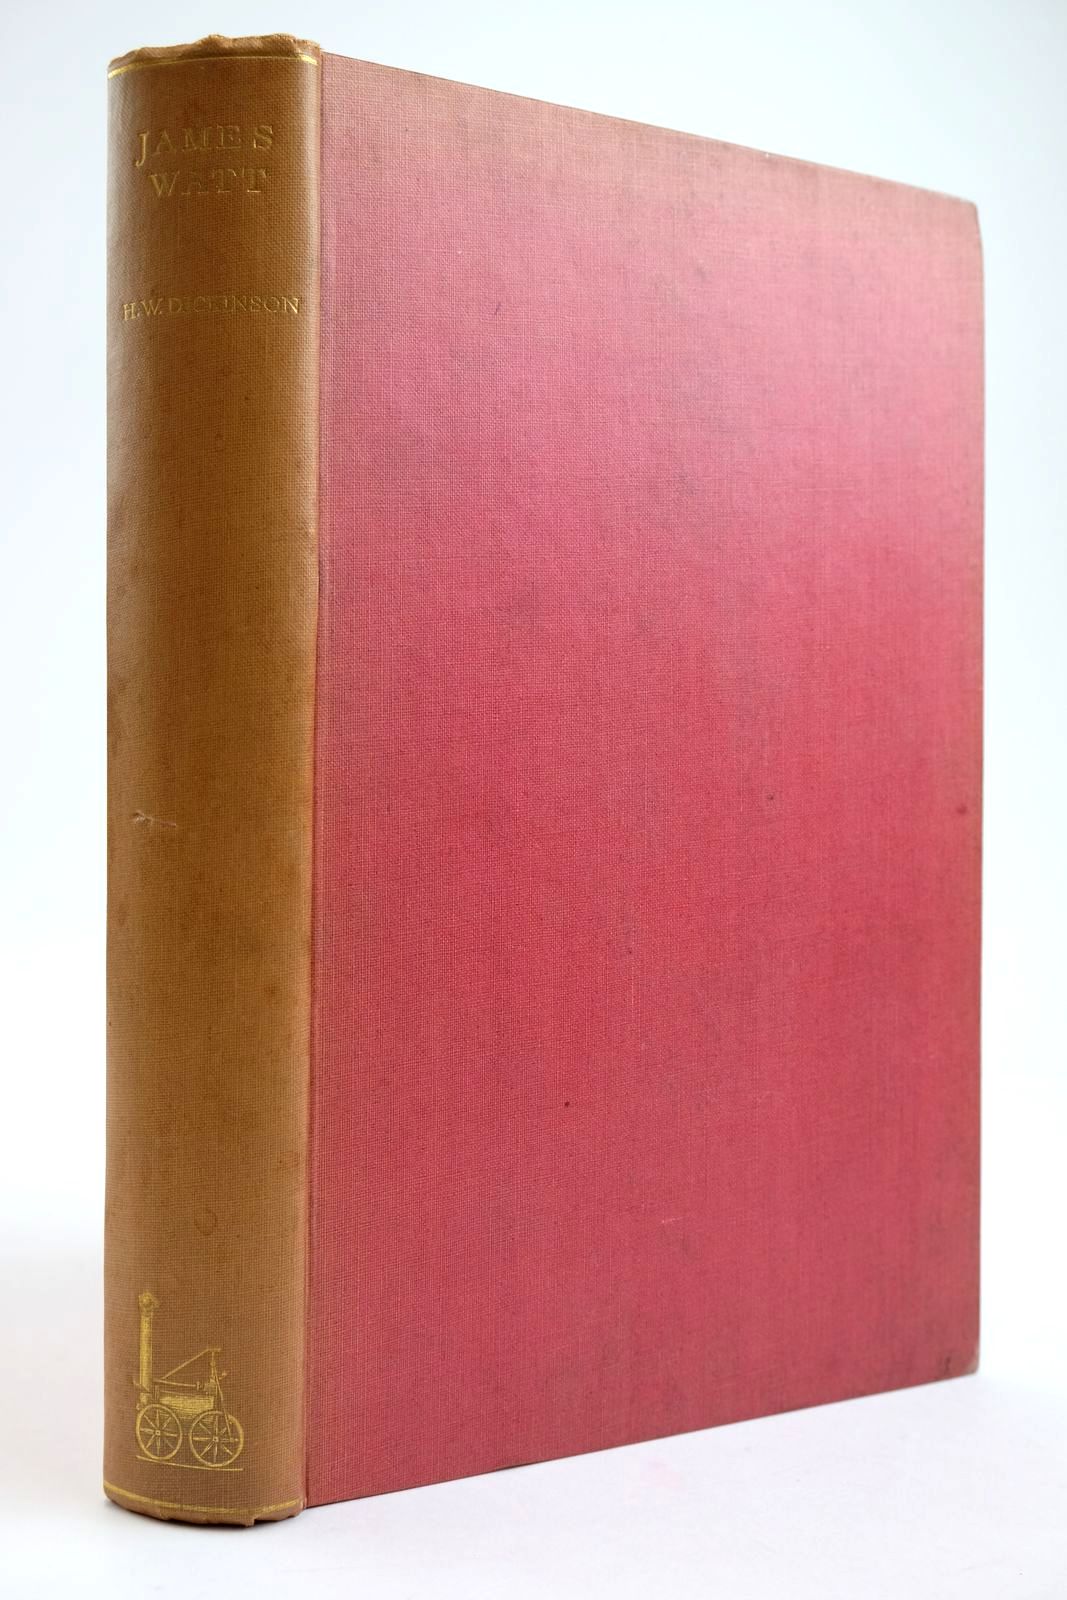 Photo of JAMES WATT CRAFTSMAN & ENGINEER written by Dickinson, H.W. published by Babcock and Wilcox (STOCK CODE: 2133602)  for sale by Stella & Rose's Books